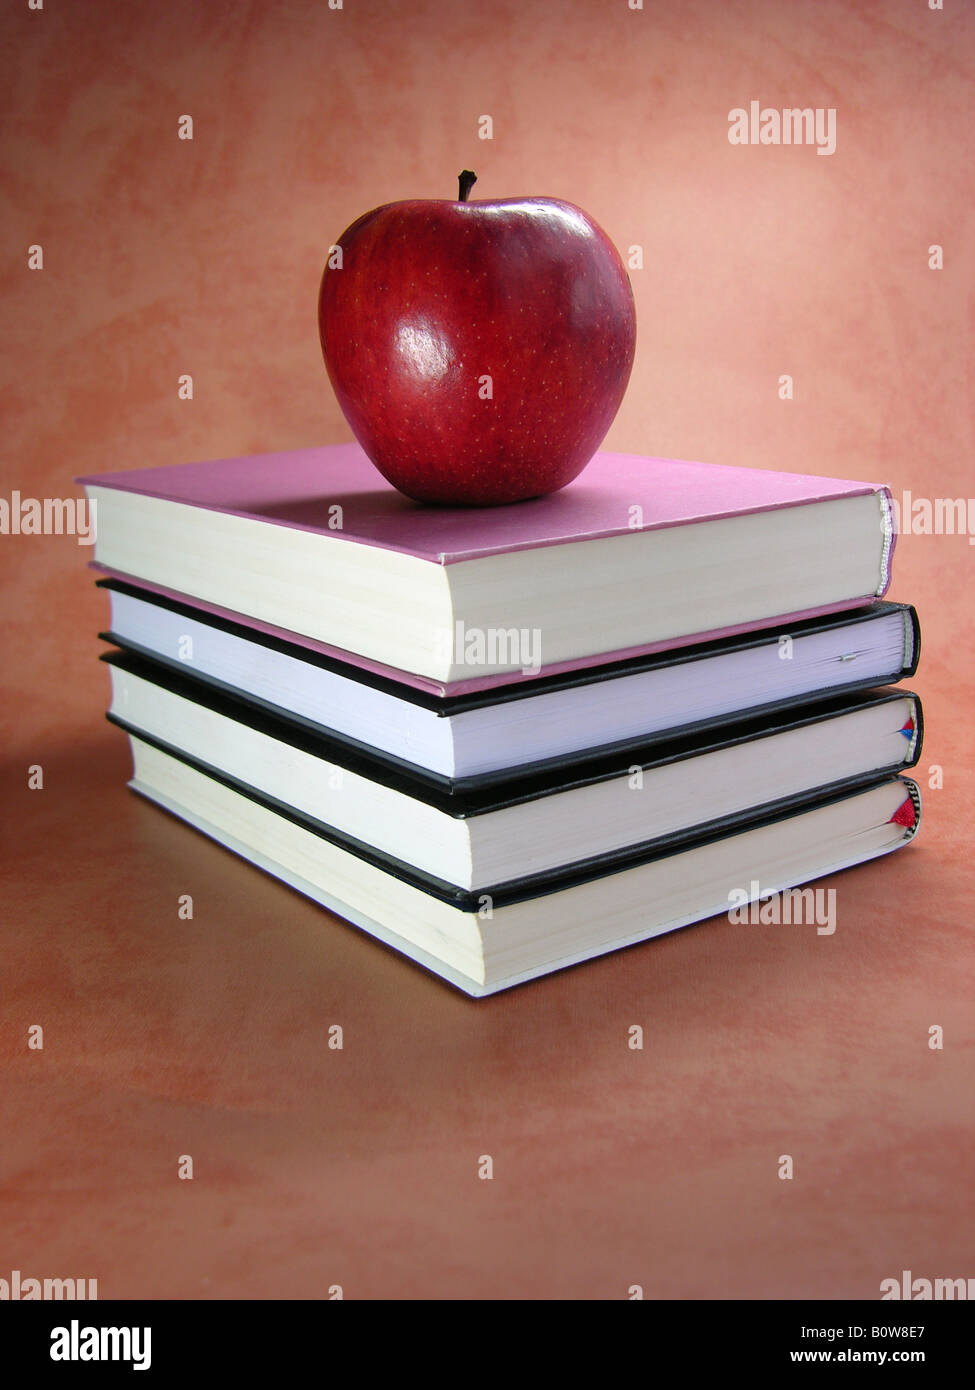 Red apple on top of a stack of books Stock Photo